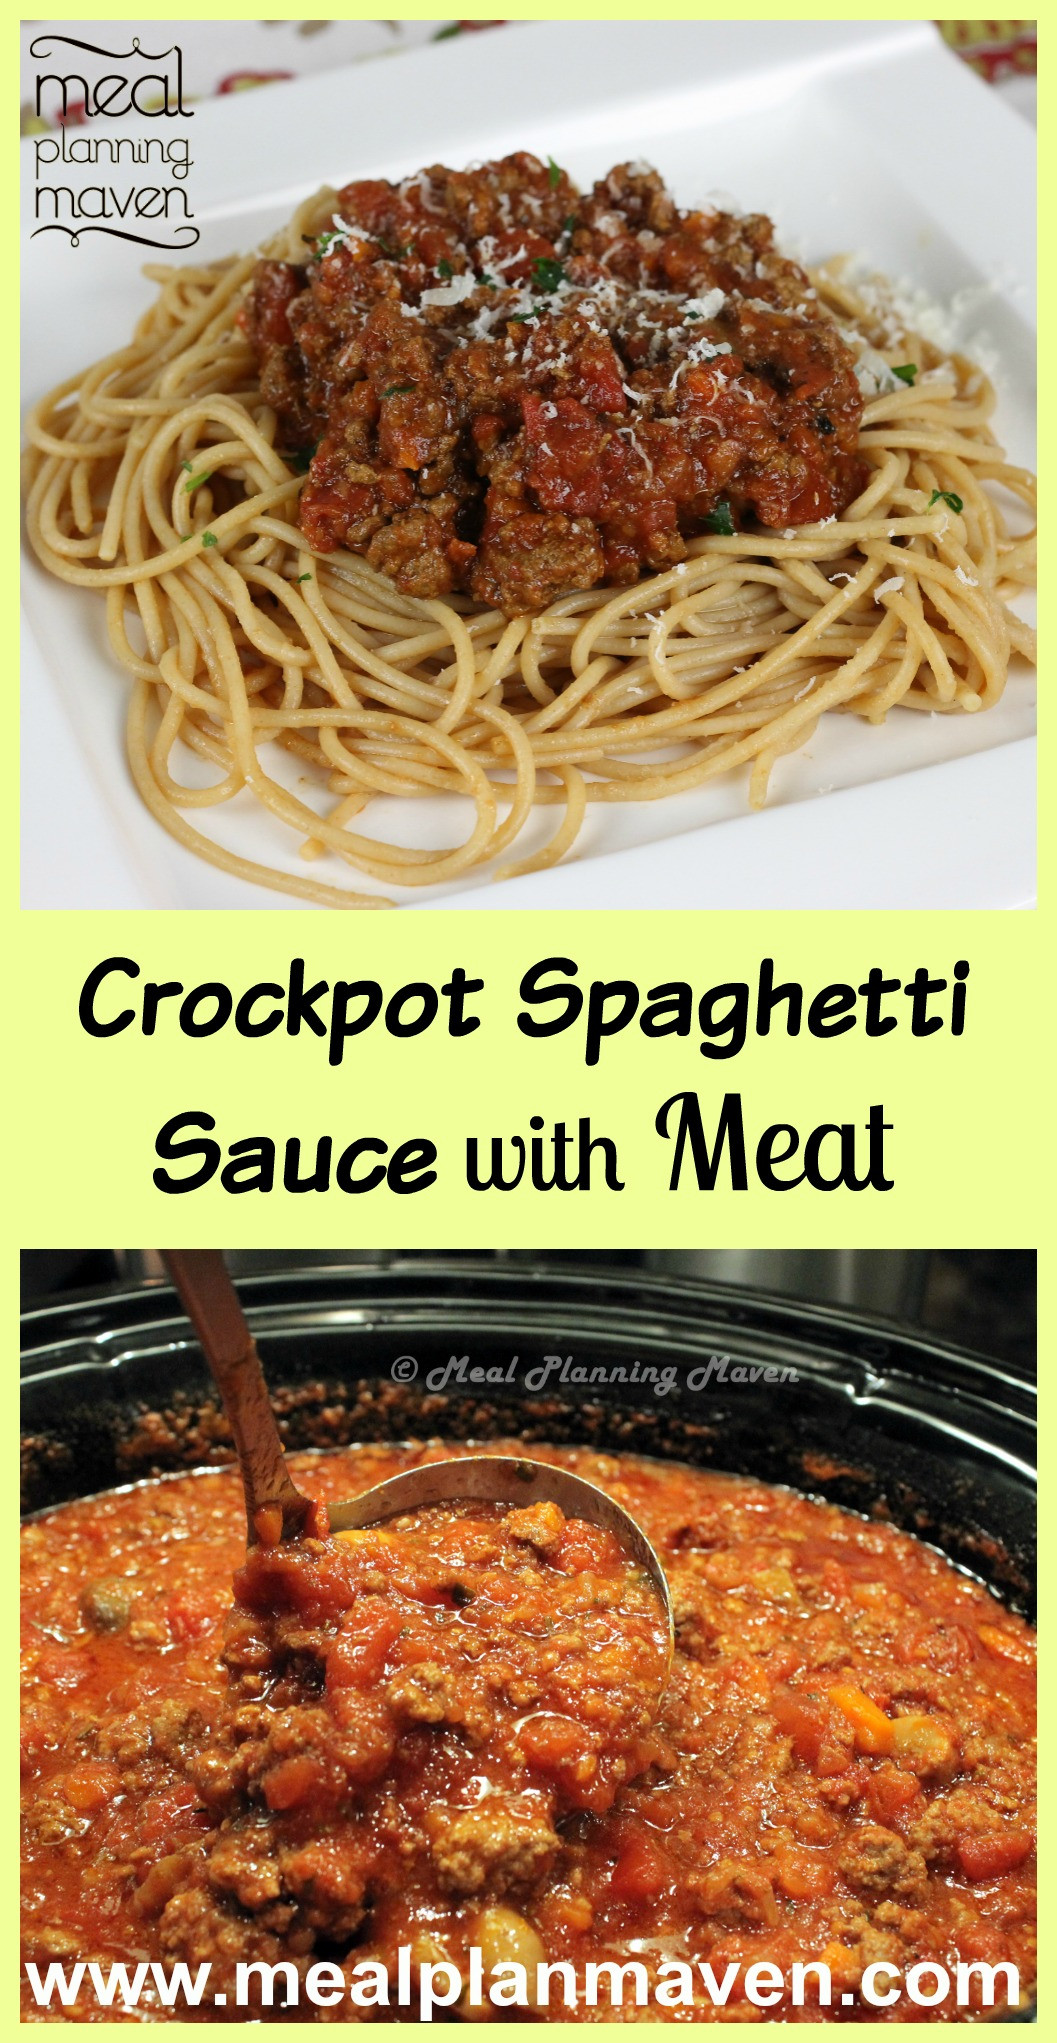 Crockpot Spaghetti Sauce
 Crockpot Spaghetti Sauce with Meat